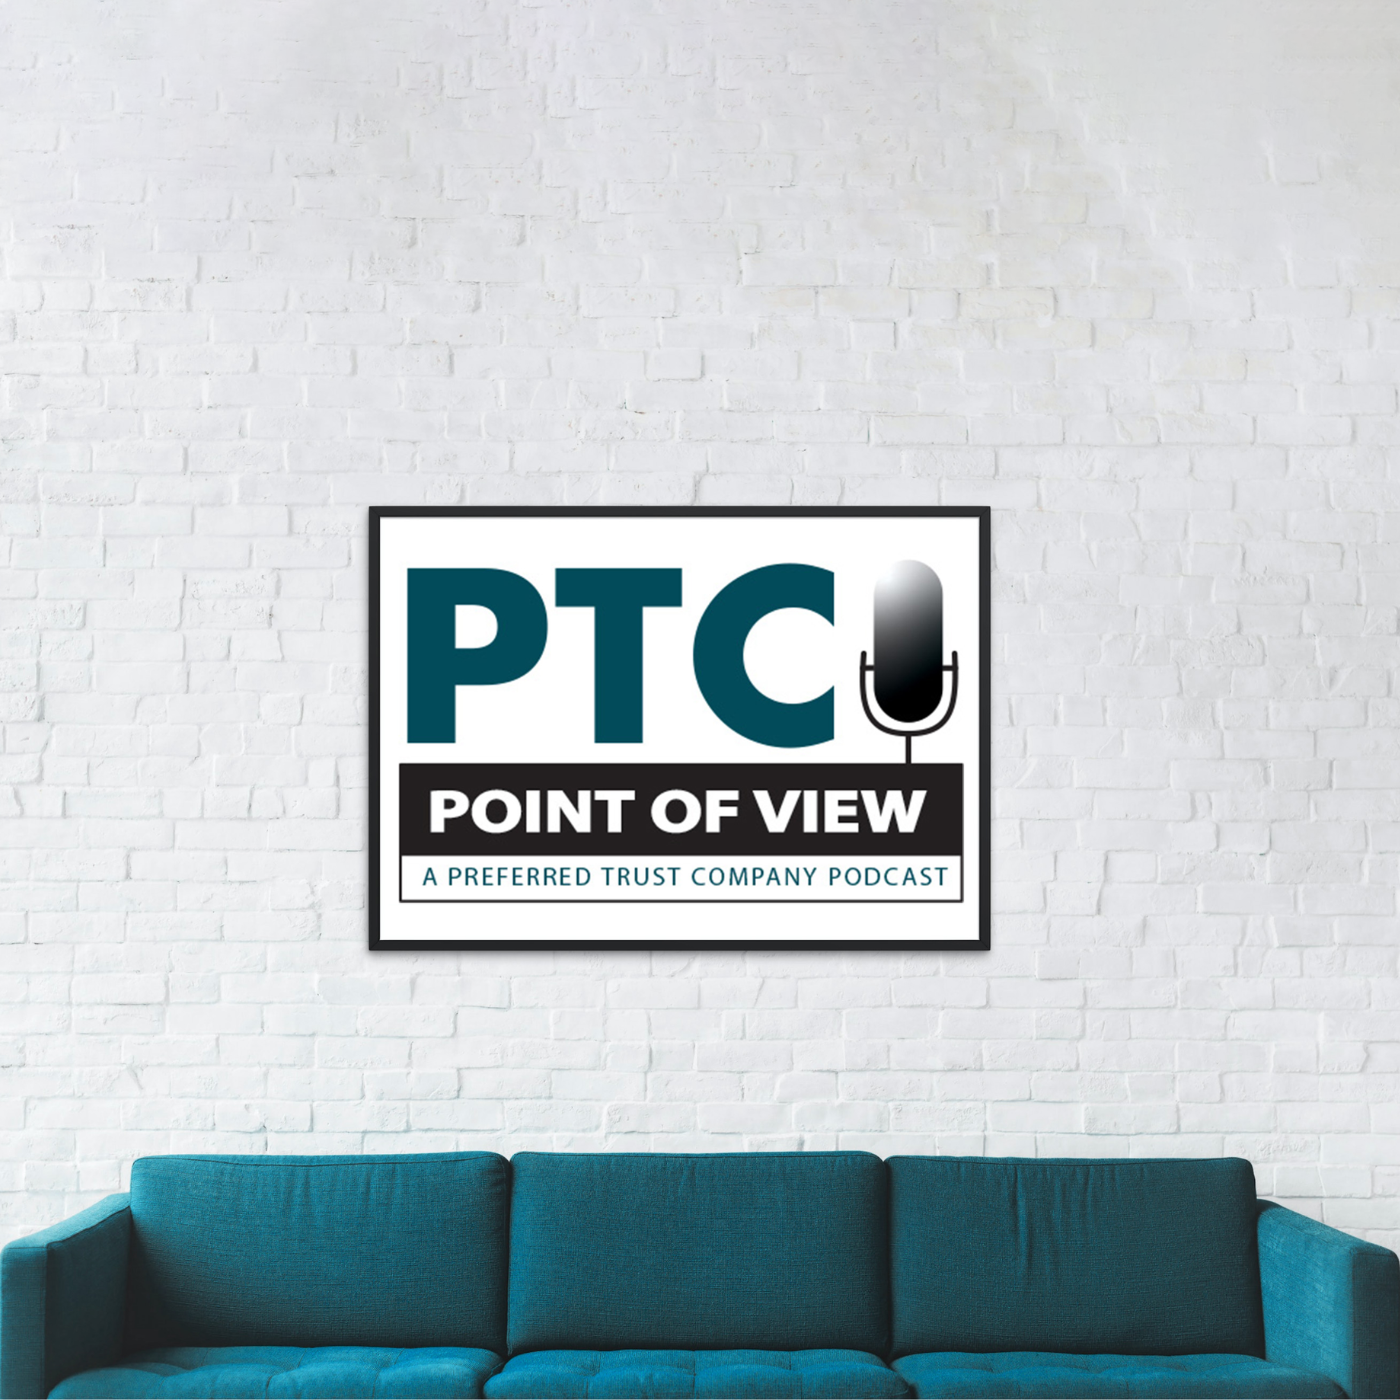 PTC Clients: Statement Questions Answered